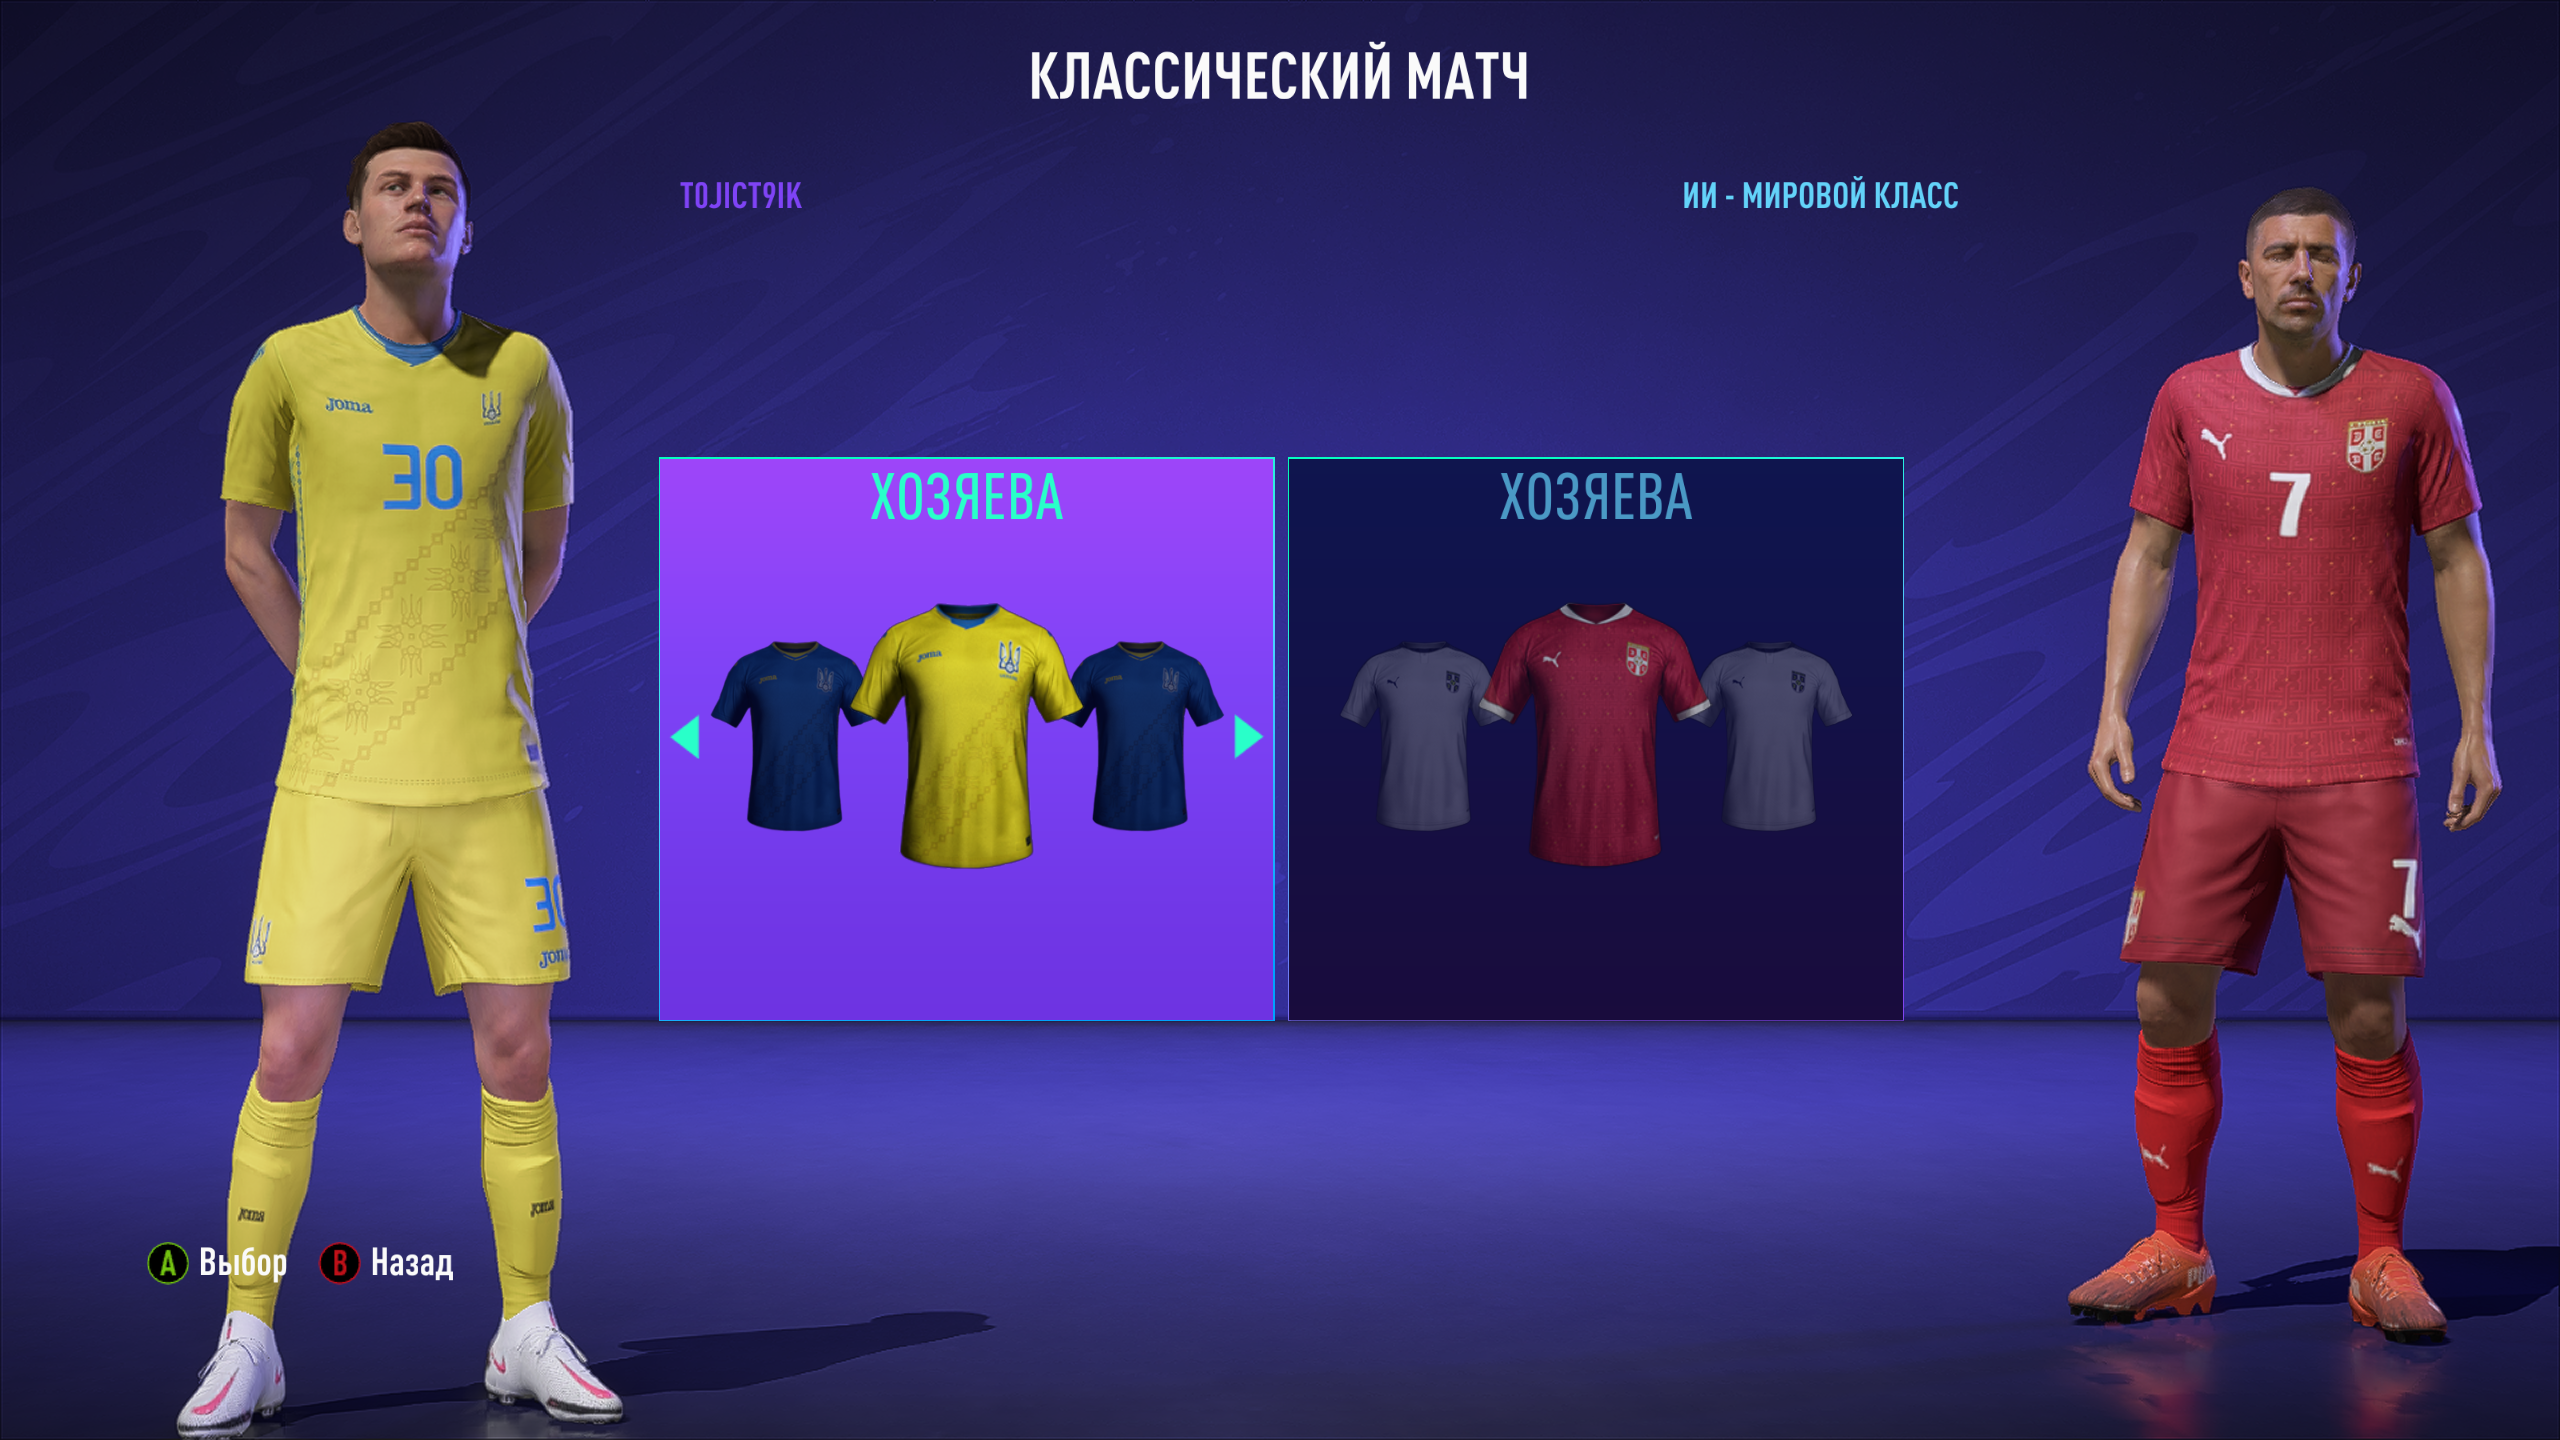 FIFA 11 Expansion Patch. Вратарская форма мокап. European Expansion Patch Mod FIFA 22 картинки. Fifa mod manager fifa 24